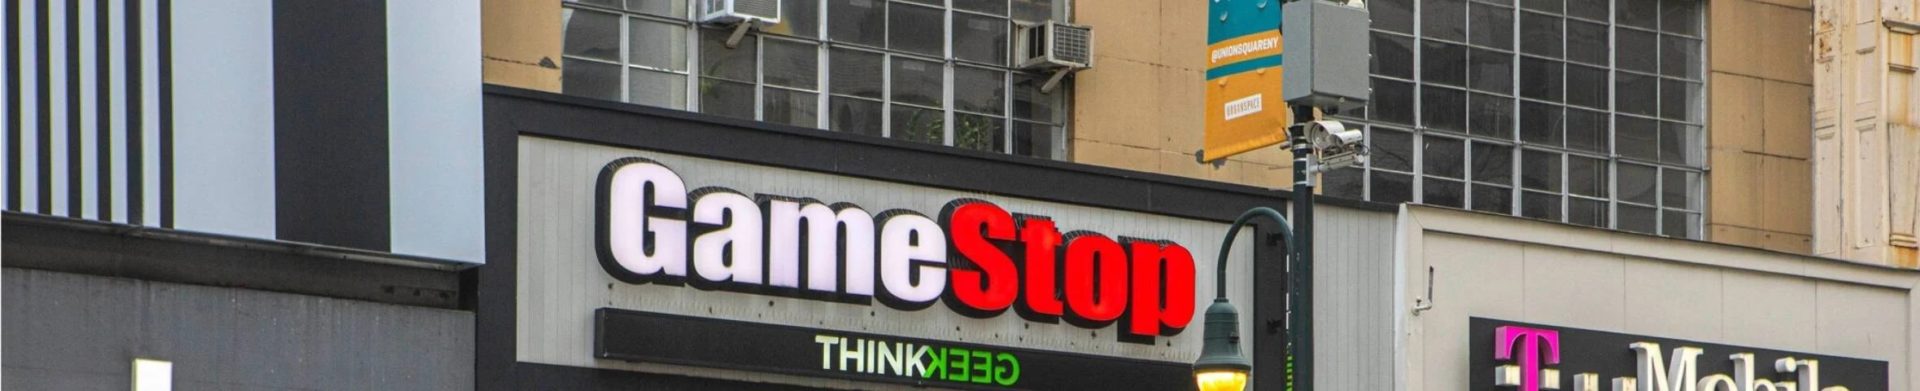 GameStop storefront in the daytime